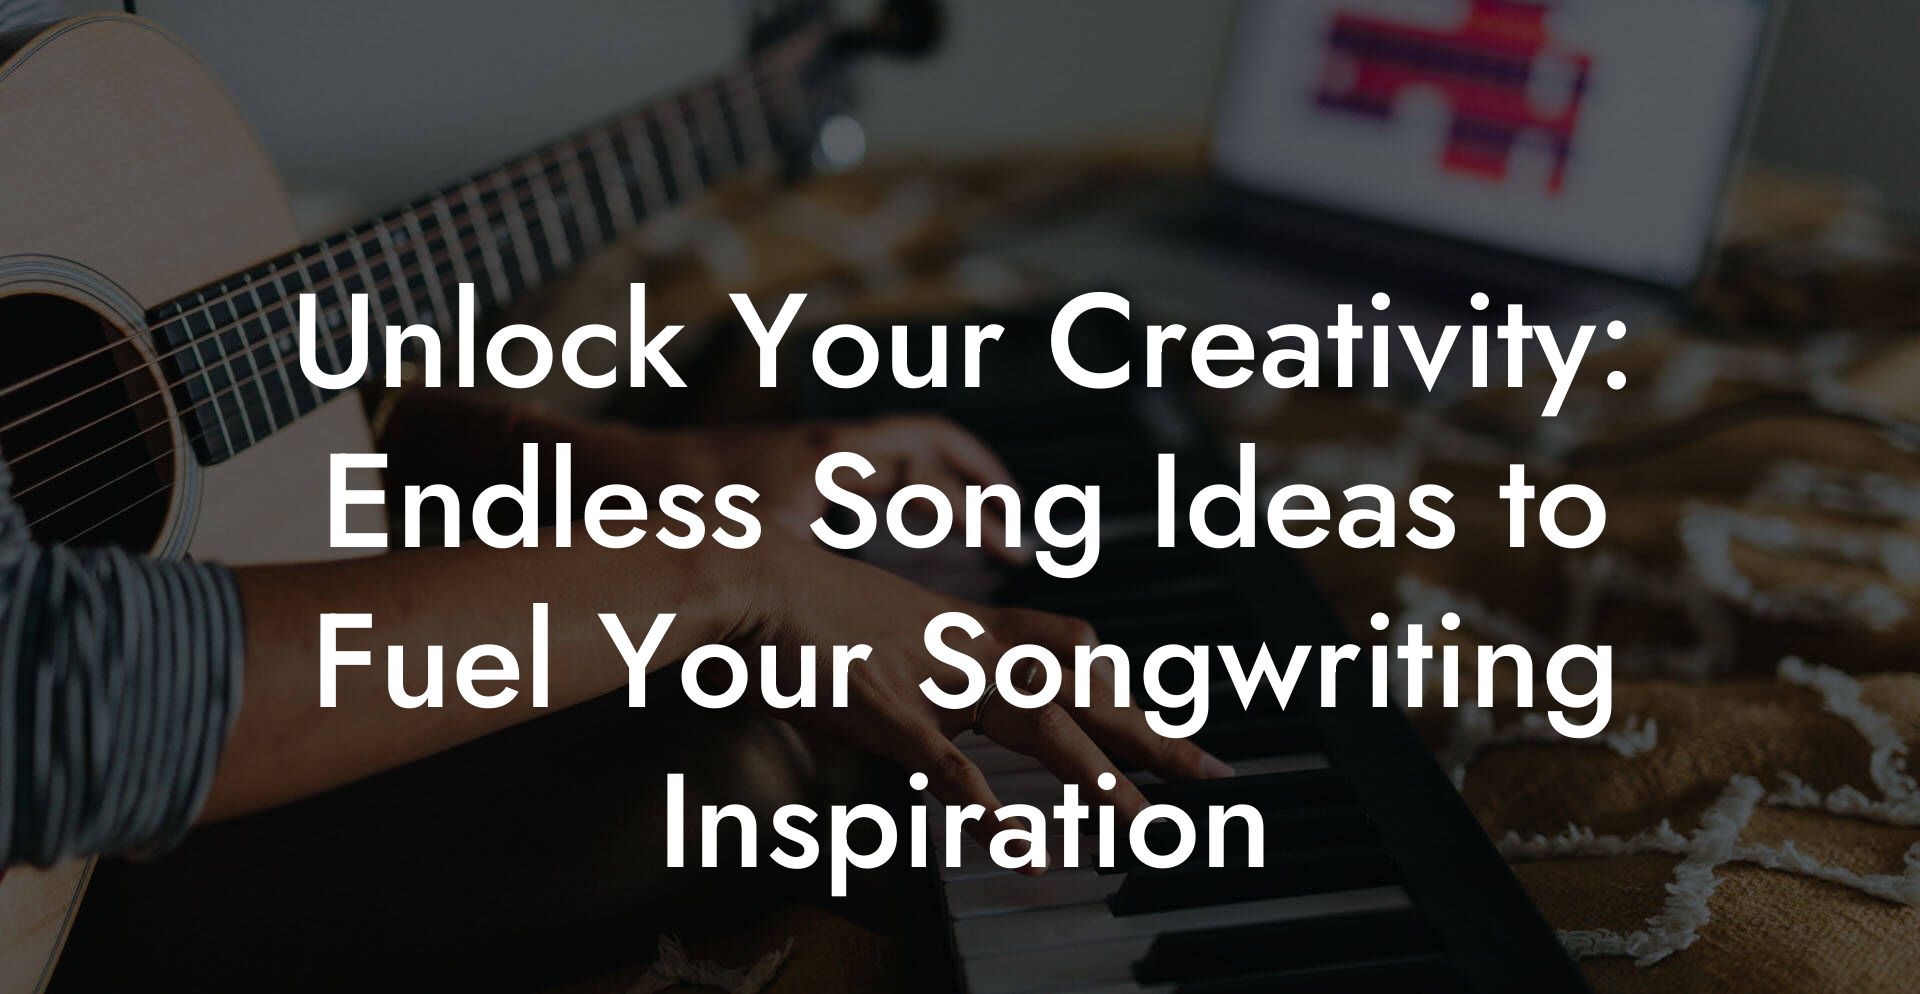 unlock your creativity endless song ideas to fuel your songwriting inspiration lyric assistant